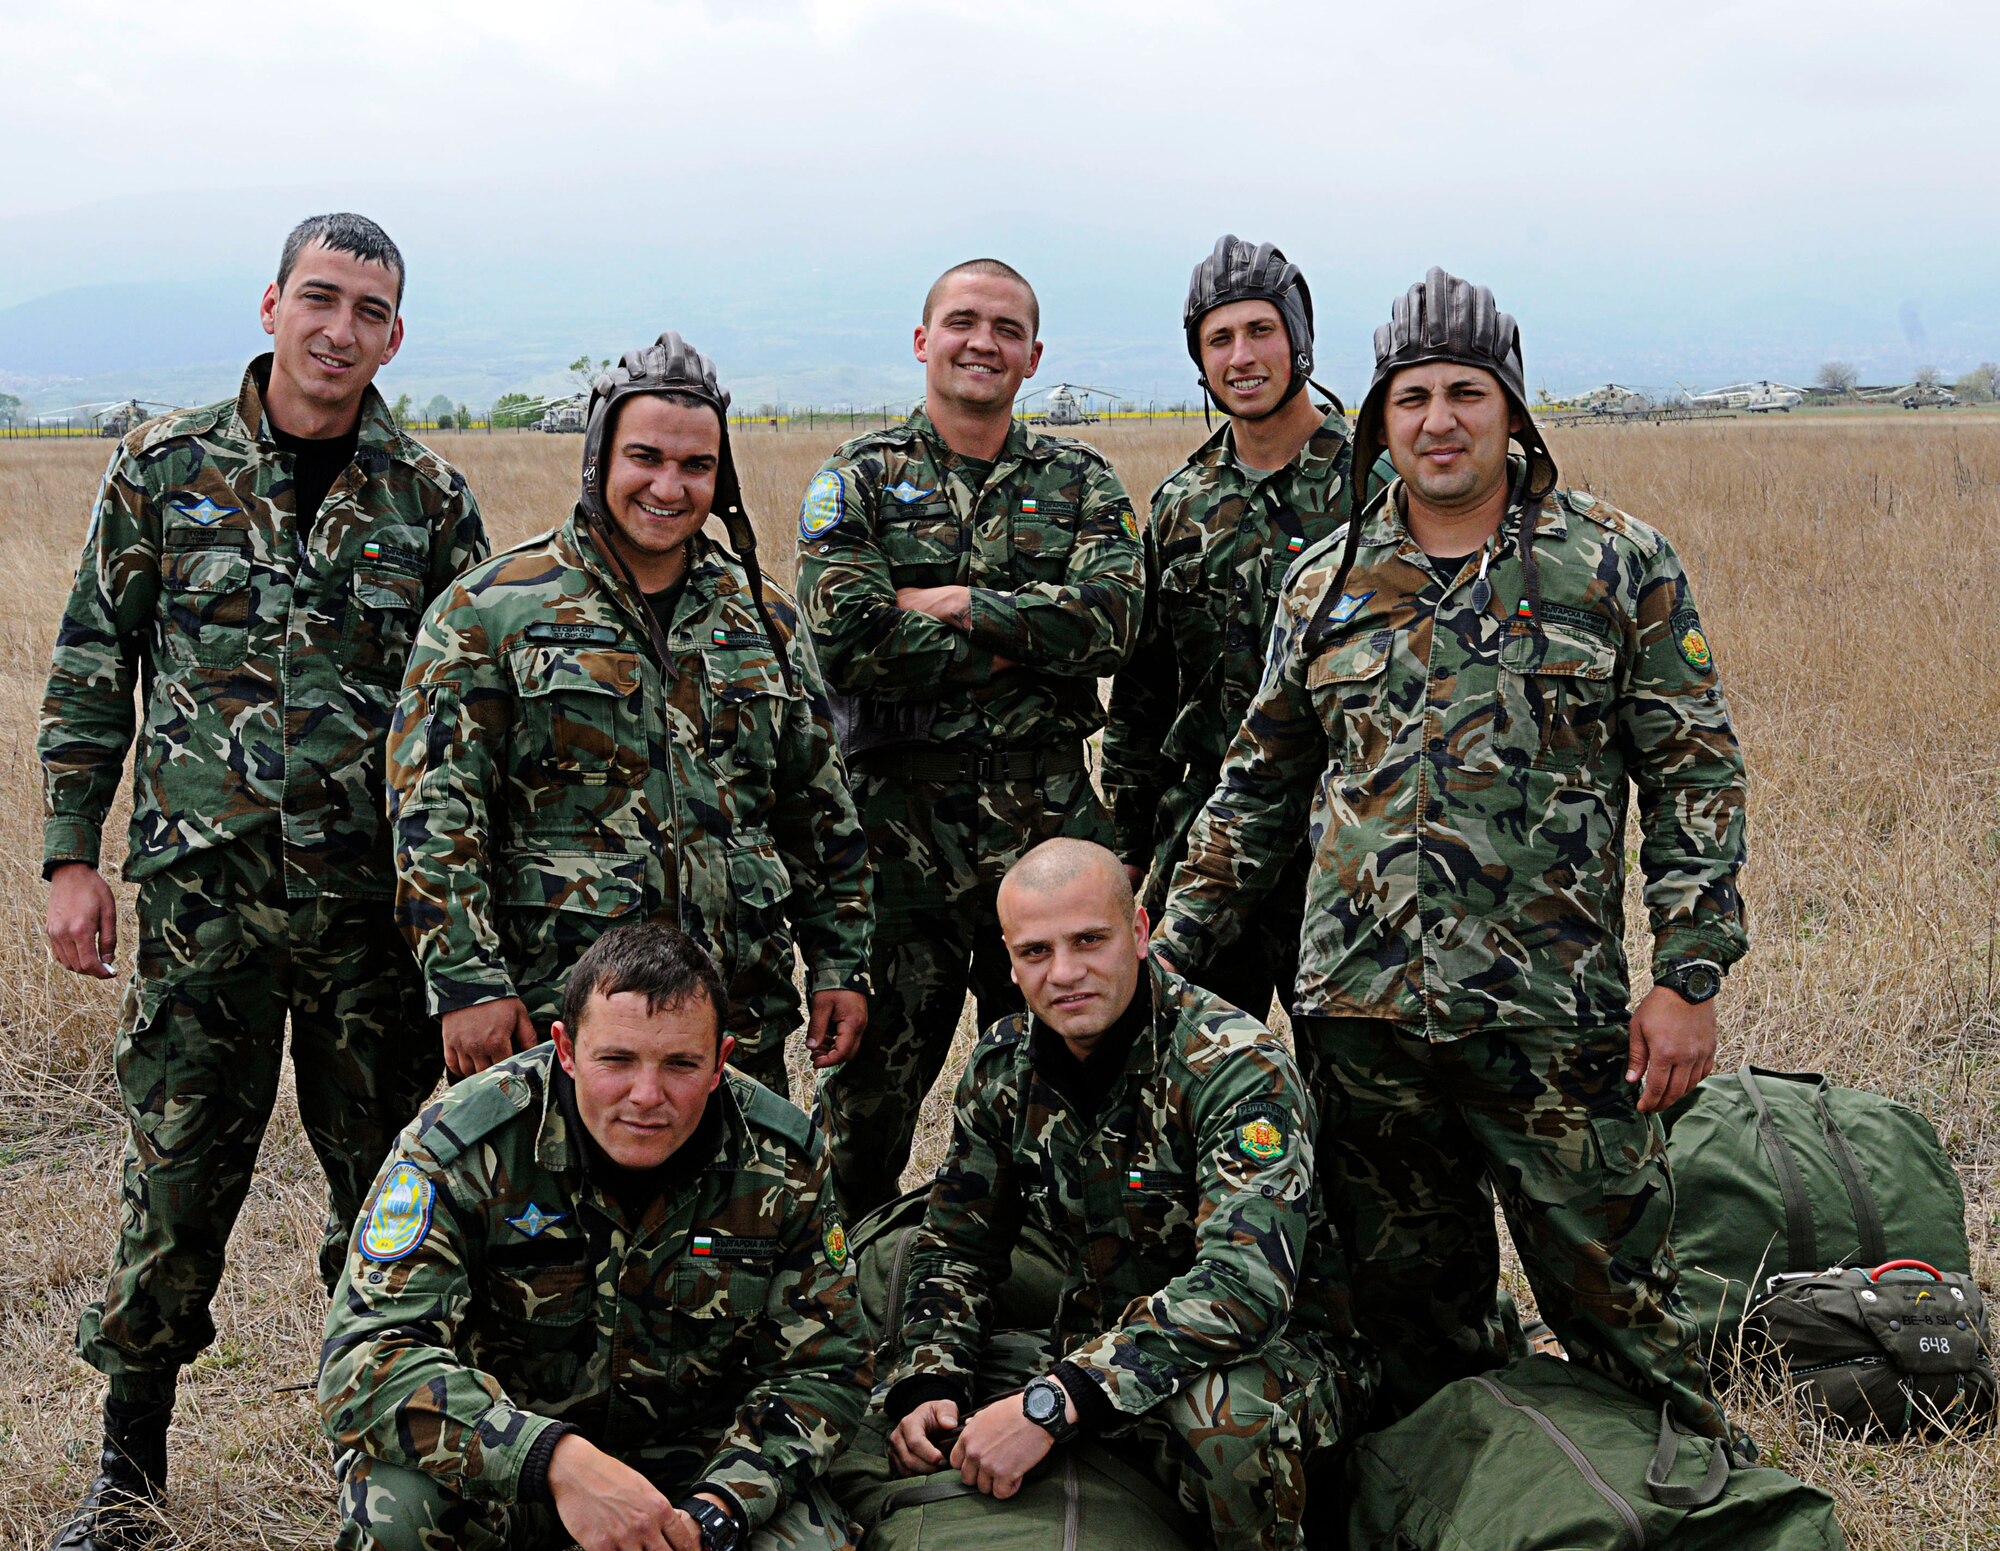 Bulgarian Air Force paratroopers pose for a photo at the drop zone near Plovdiv Airport, after a successful static line jump from a U.S. Air Force C-130J Super Hercules in support of Thracian Spring 2011, Plovdiv, Bulgaria, April 29, 2011. Thracian Spring 2011 is a two week on-site training designed to build partnerships between the U.S. and Bulgarian Air Force. (U.S. Air Force photo by Airman 1st Class Desiree W. Esposito)